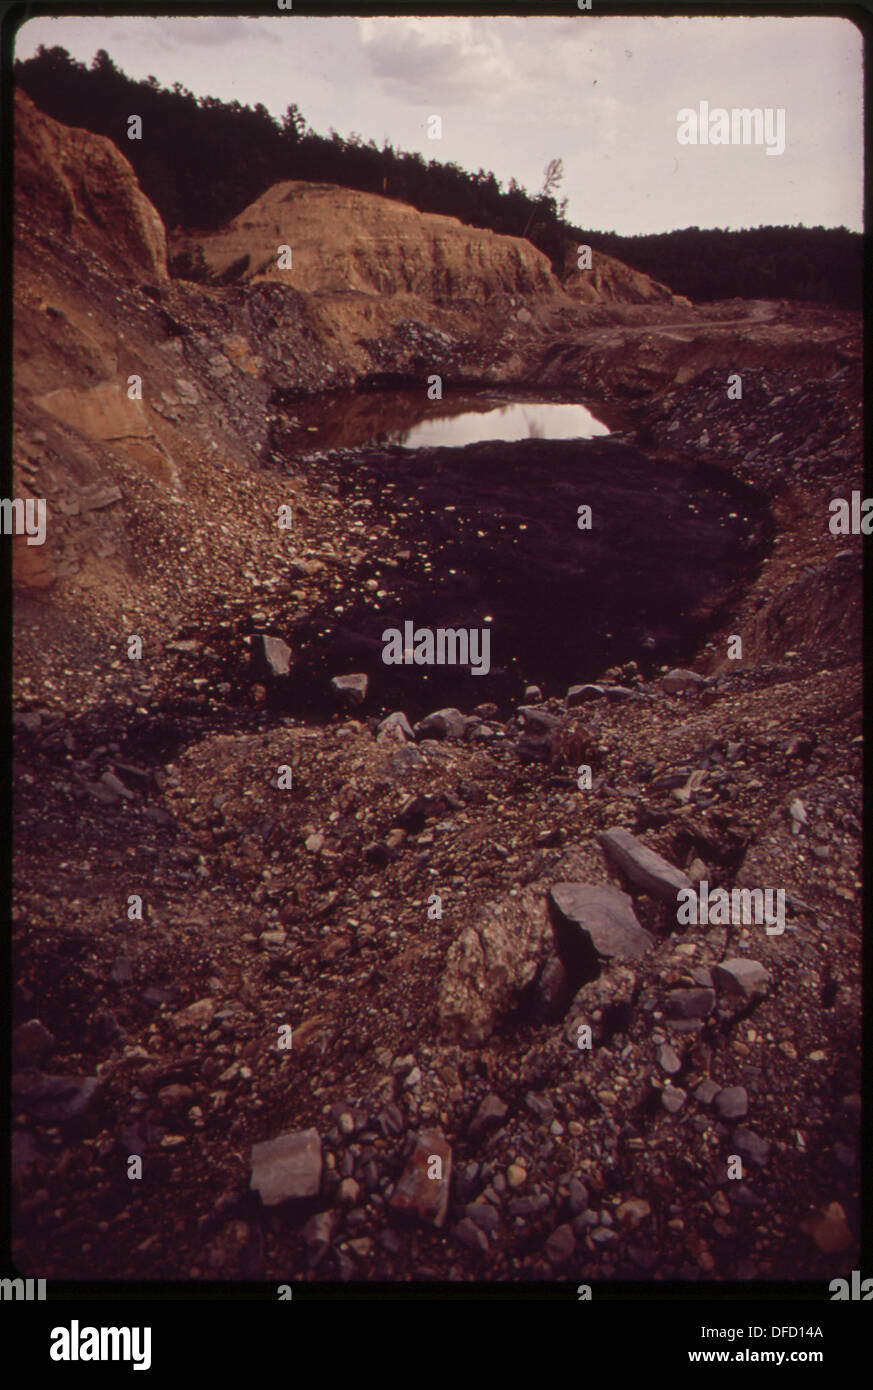 EFFECT OF A STRIP MINING OPERATION OFF ROUTE 269 NEAR BIRMINGHAM 545529 Stock Photo